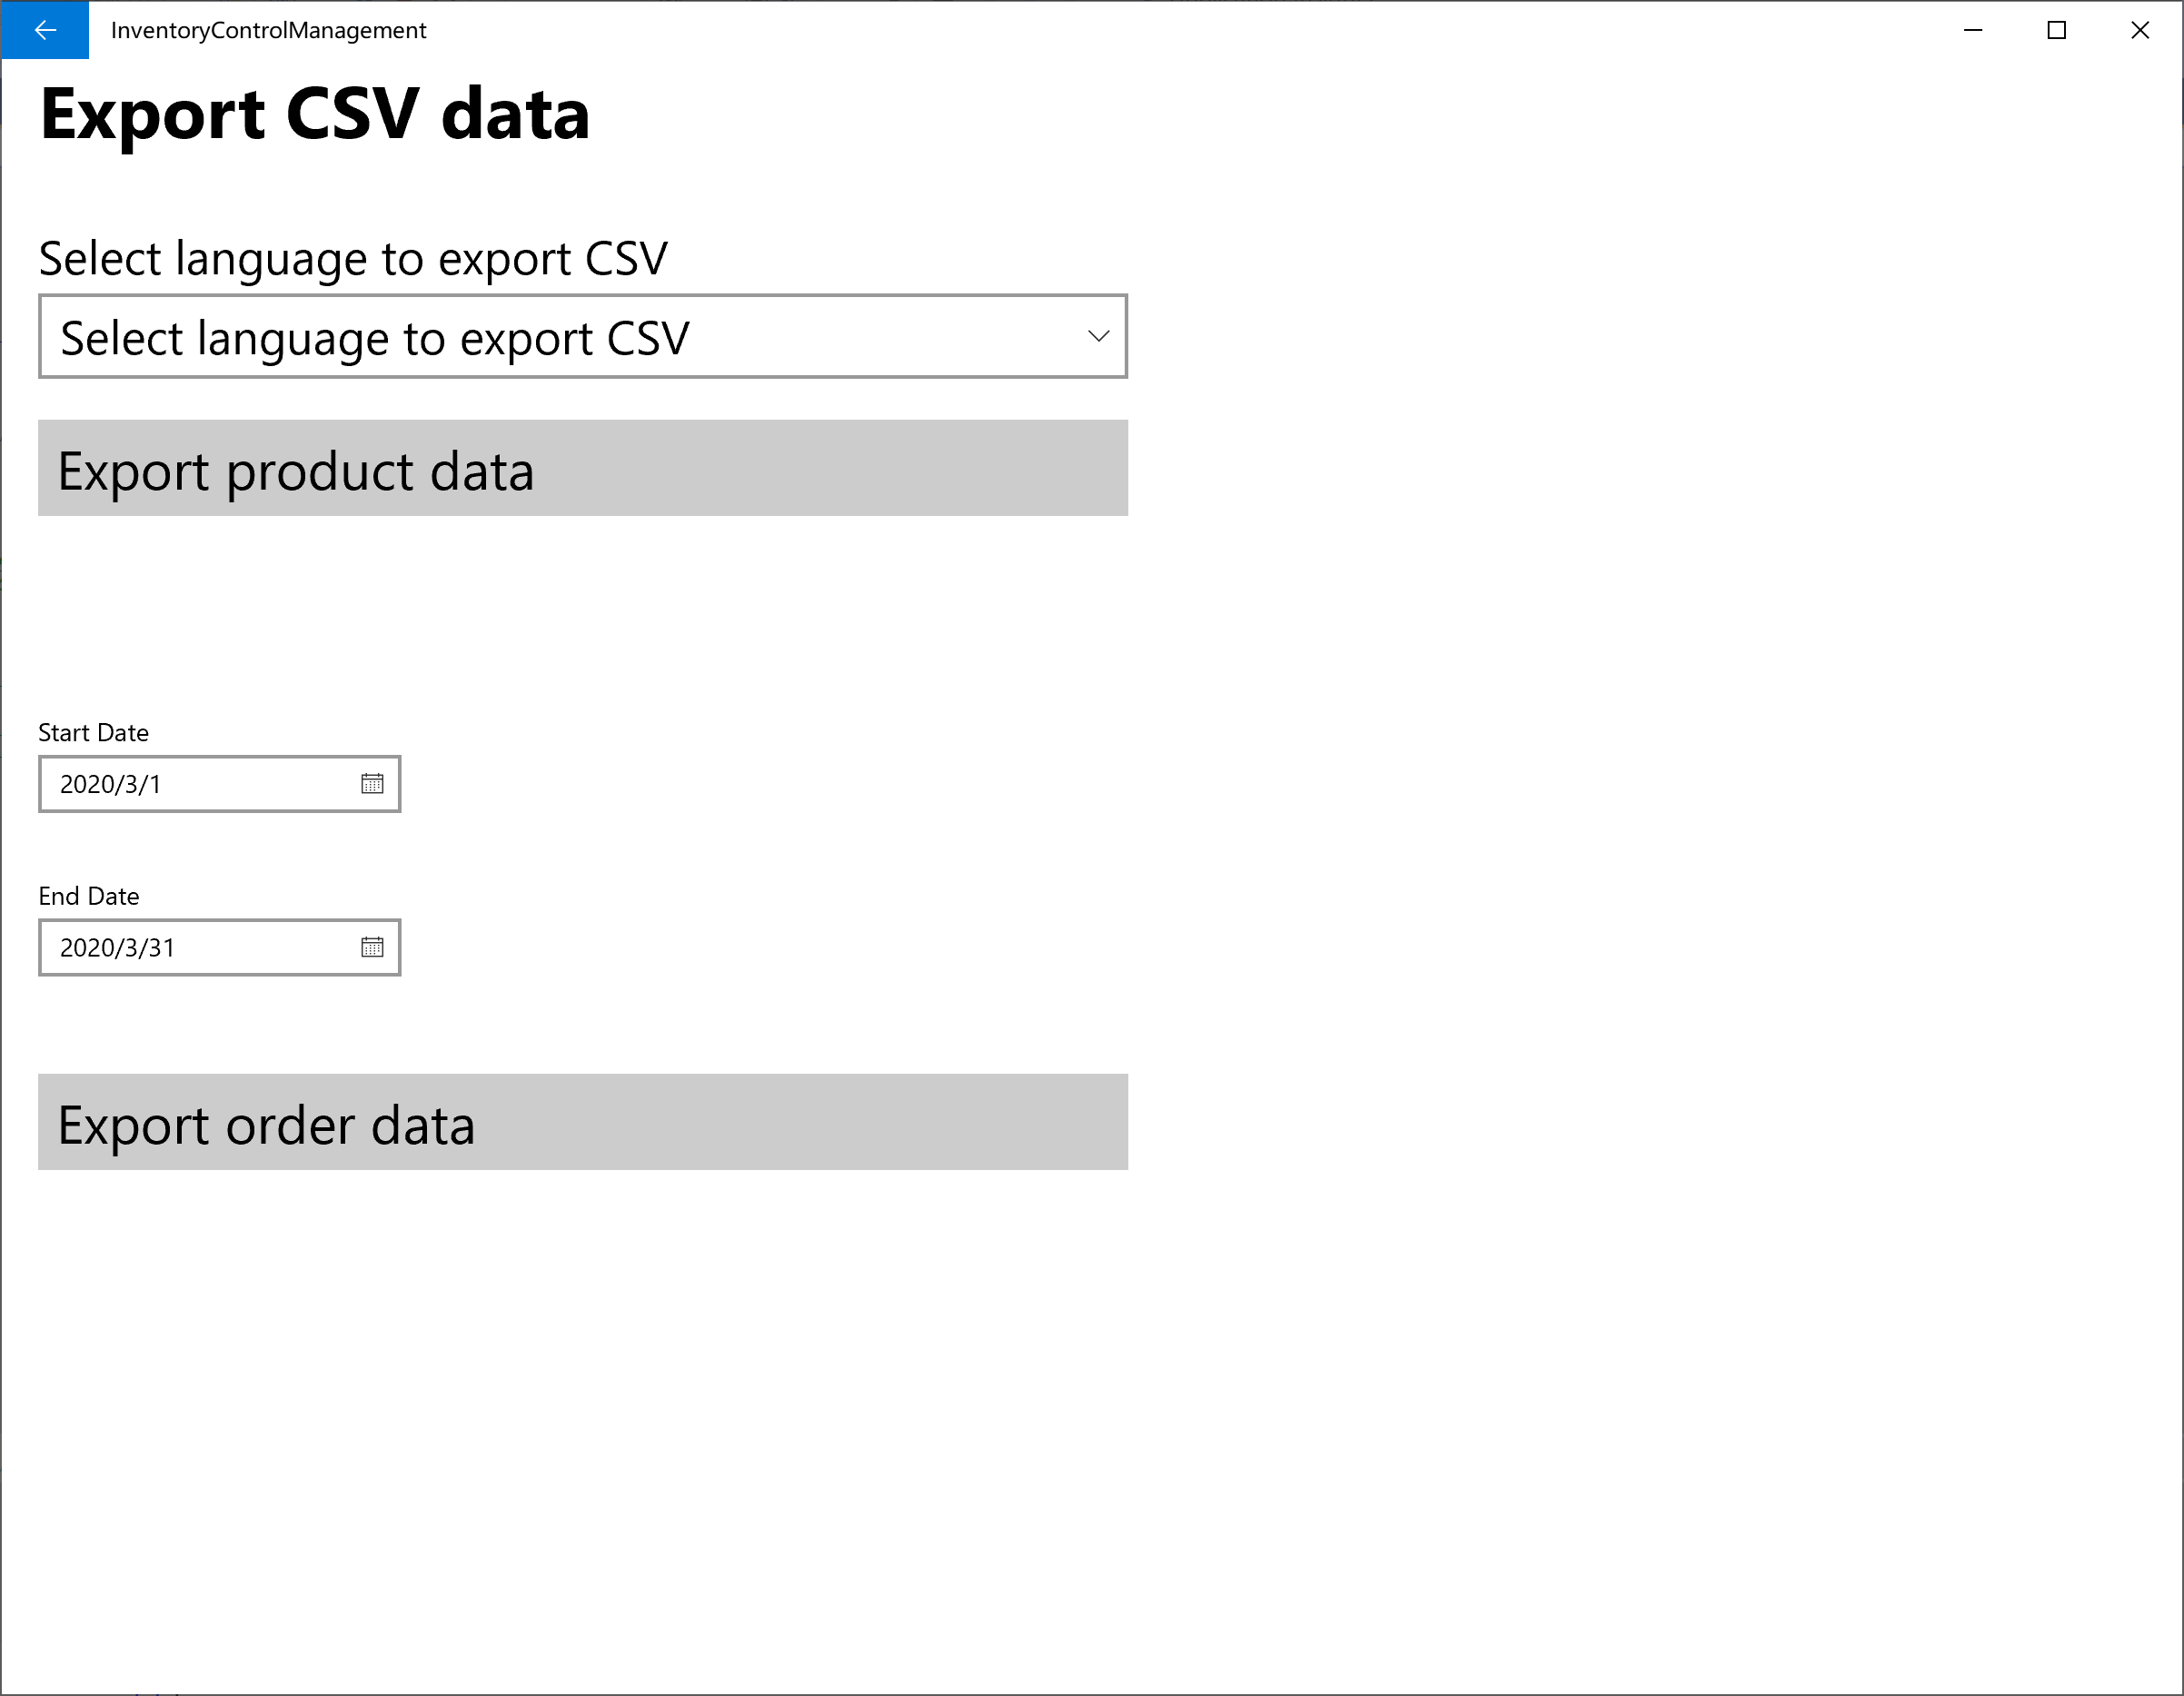 CSV data of exported products can be edited or viewed using Excel.
Export the CSV data of the order, you can use Excel to edit or view.